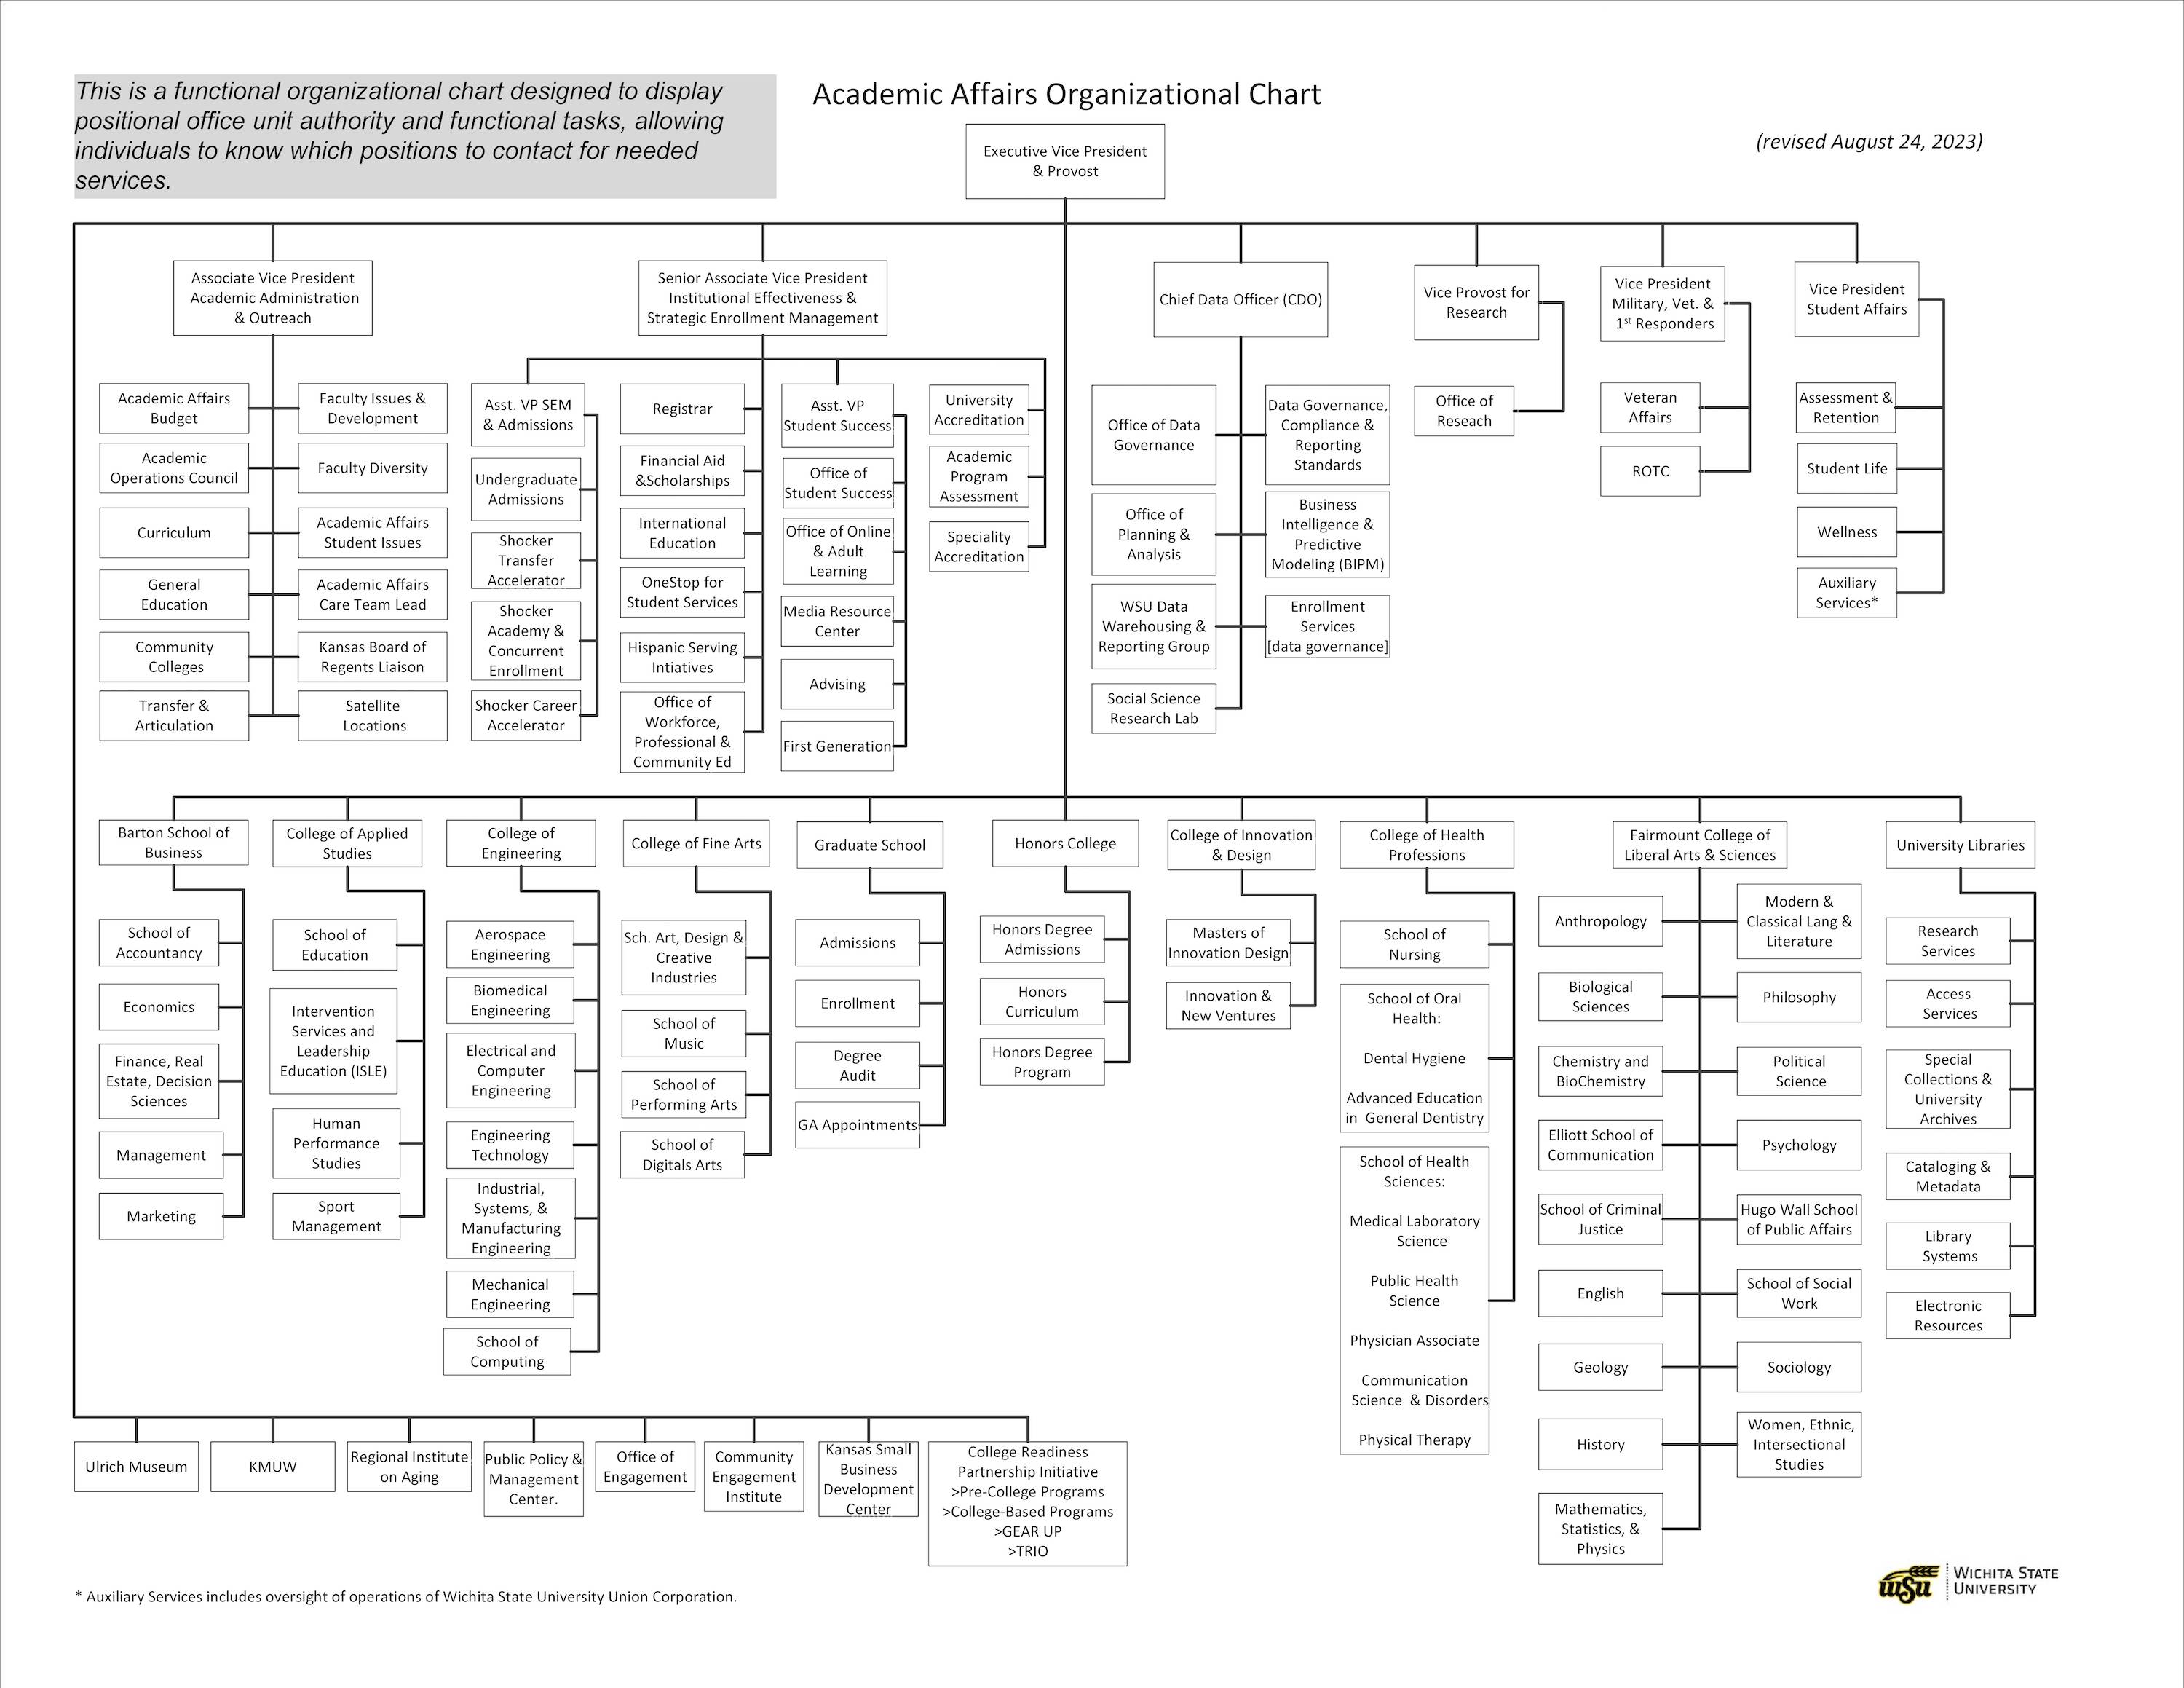 Image of the Organizational Chart. Screenreader-friendly list version of the organization is below.